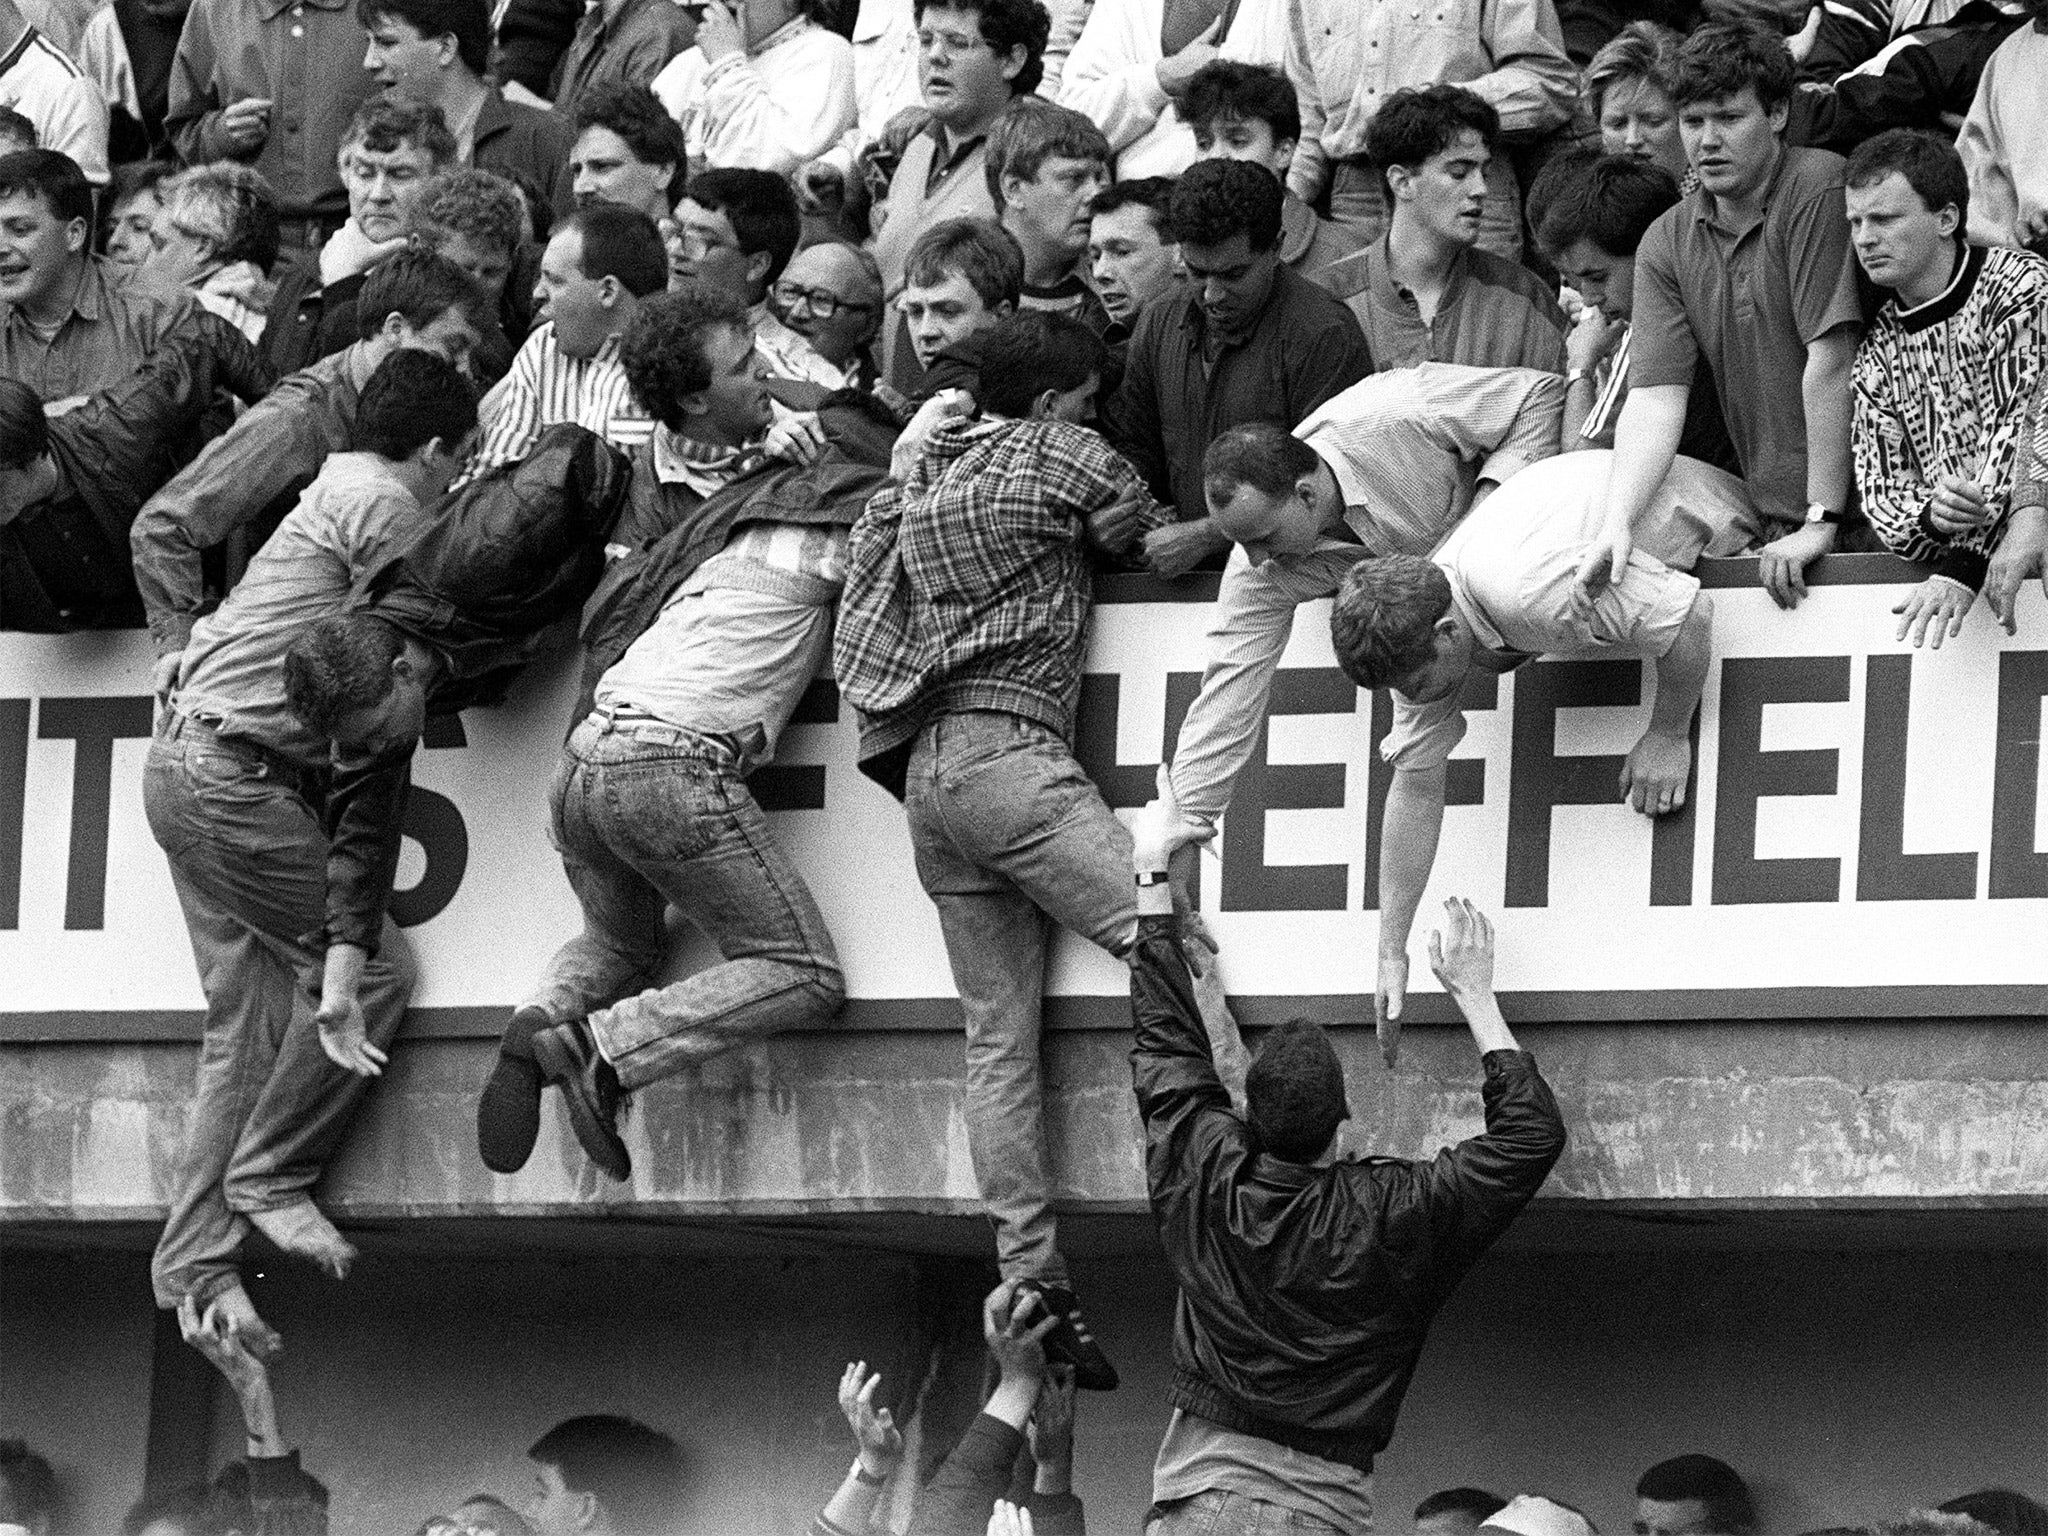 The inquests into the 1989 Hillsborough disaster are currently reviewing evidence